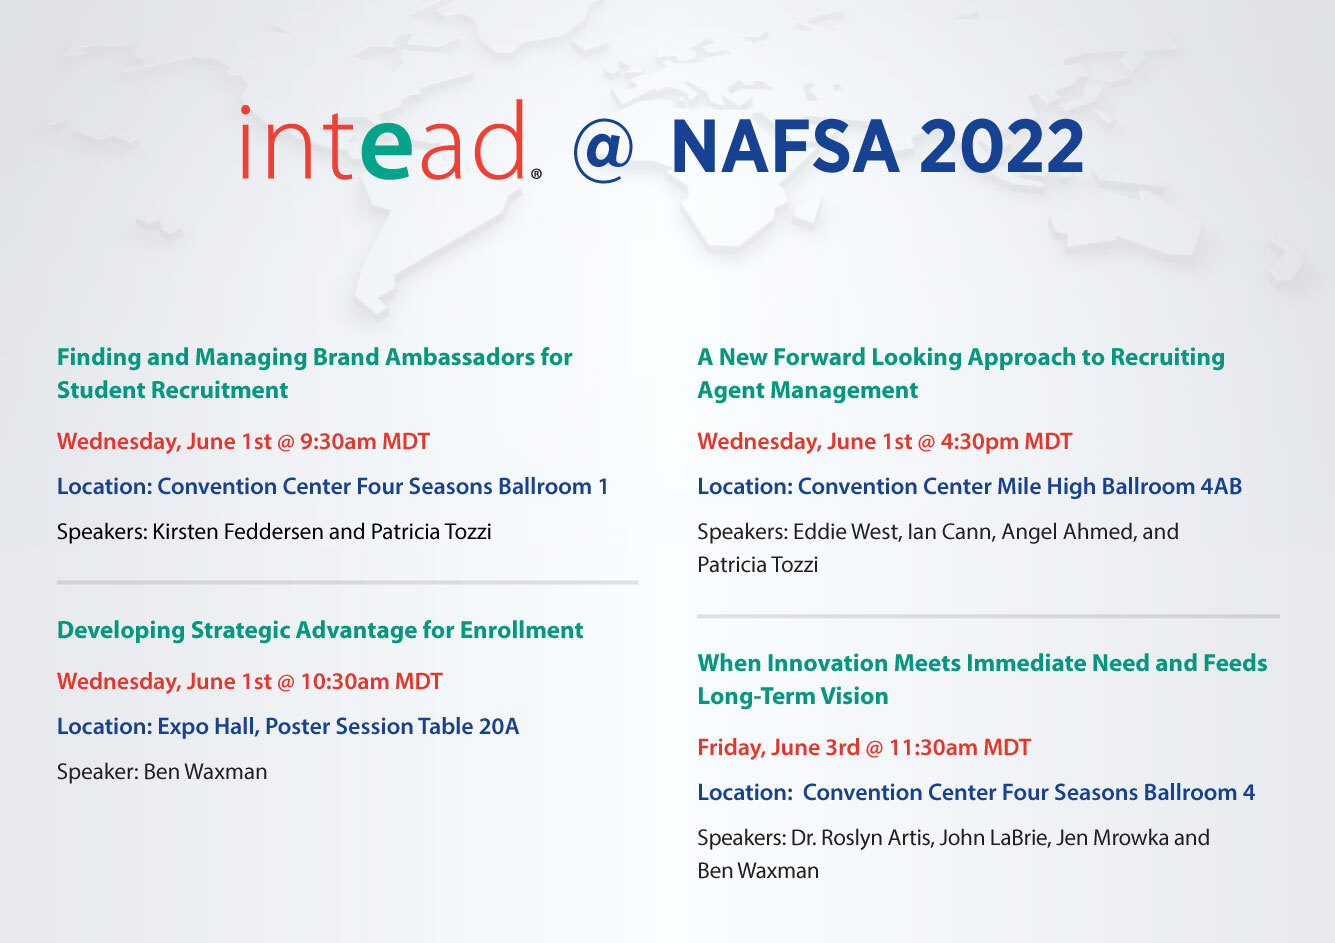 Join us for one of our four interactive NAFSA presentations along with our colleagues from Benedict College, San Diego State University, Clark University, Northeastern University, CIEE, ICEF, and GNET